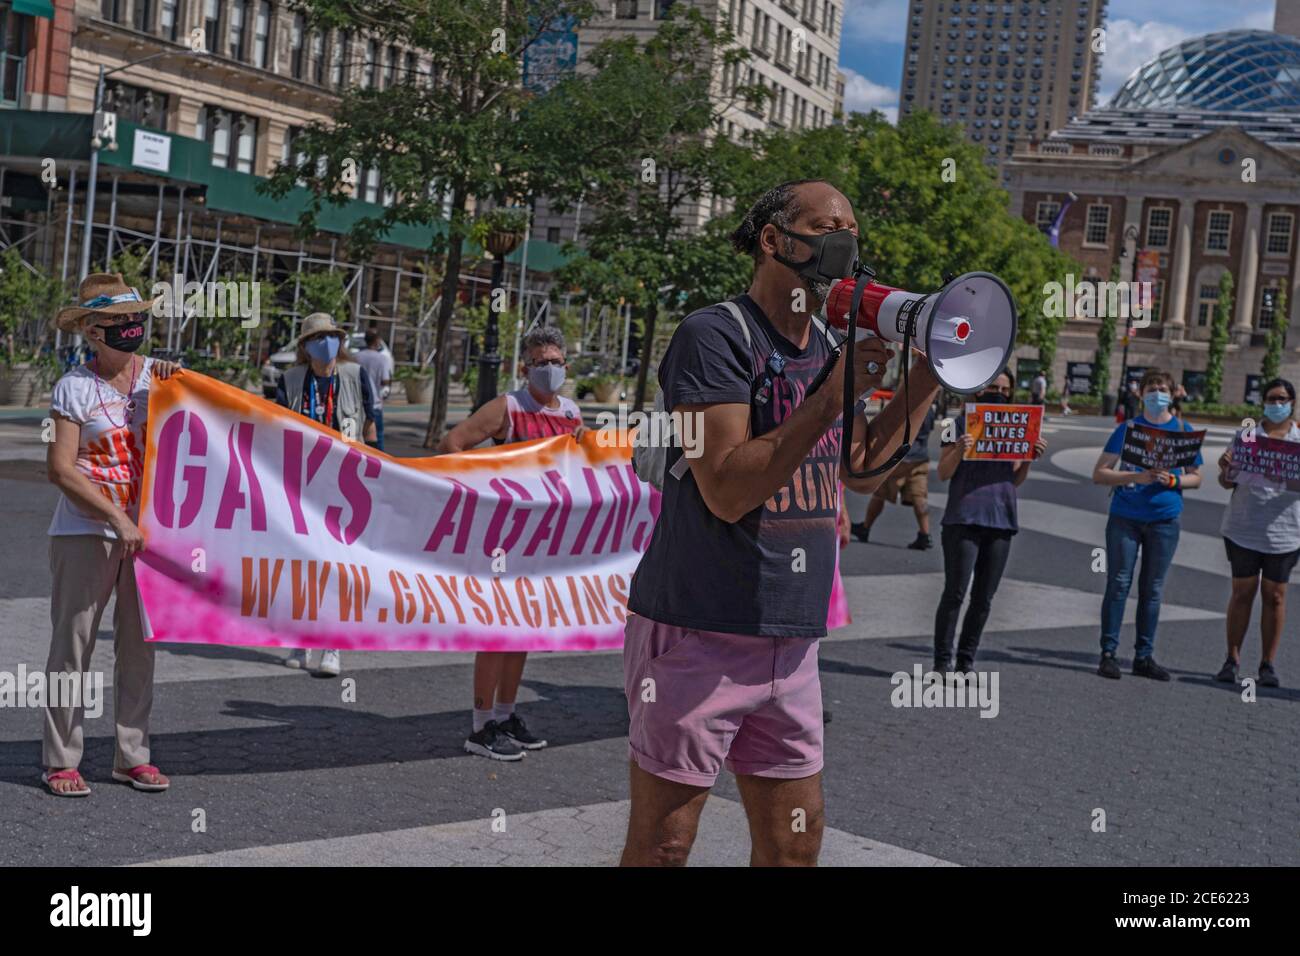 NEW YORK, NEW YORK - AUGUST 30: Activist speaks during a Gay Against Guns protest on August 30, 2020 in New York City. Stock Photo